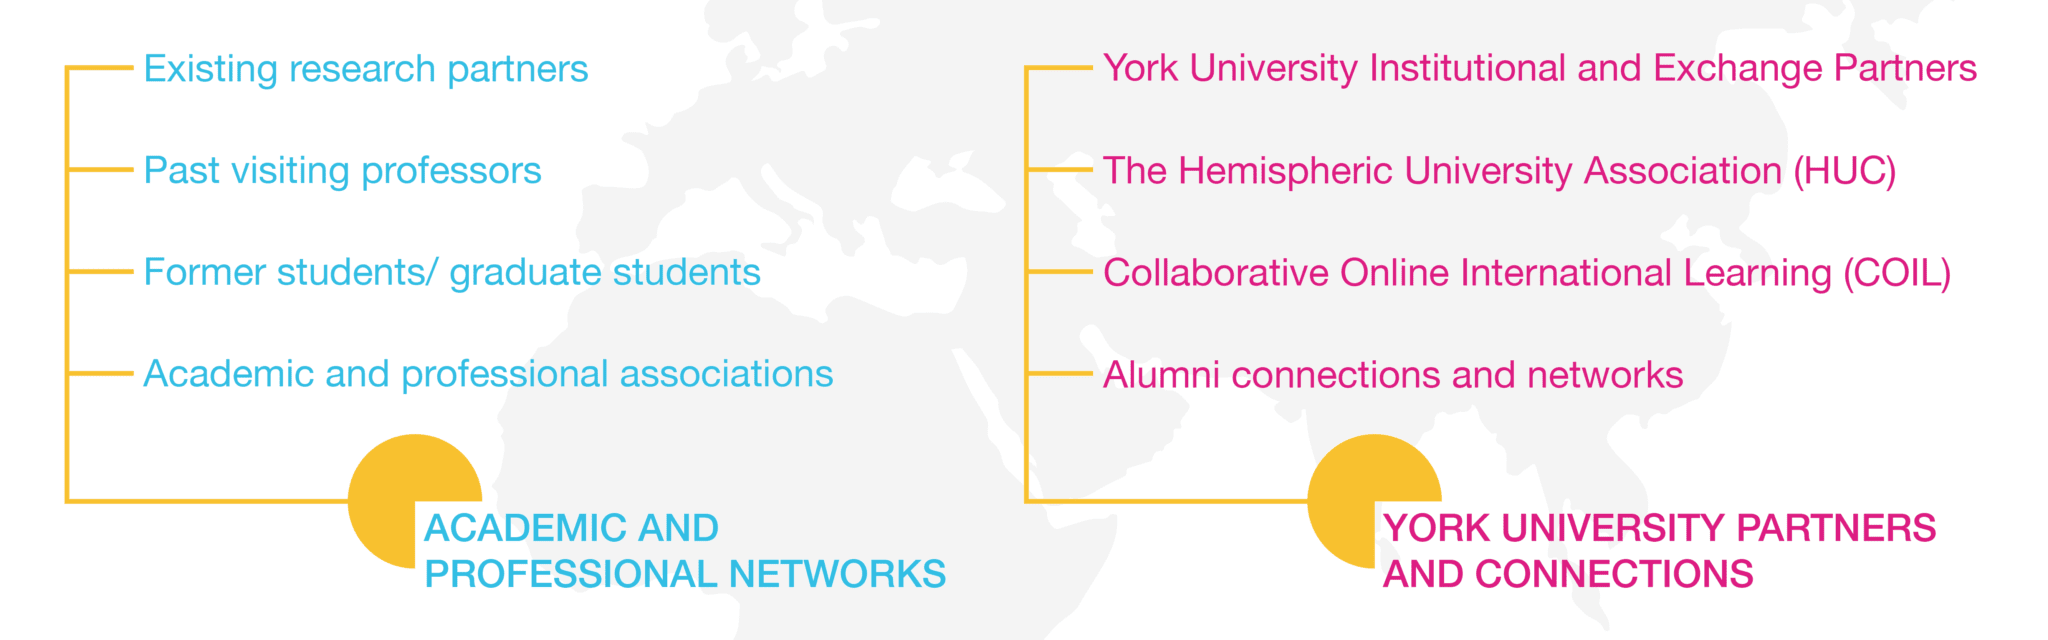 Academic and Professional Networks: Existing research partners, past visiting professors, former student/graduate students, academic and professional associations. York University partners and connections: York University institutional and exchange partners, the Hemispheric University Association (HUC), Collaborative Online International Learning (COIL), and alumni connections and networks. 